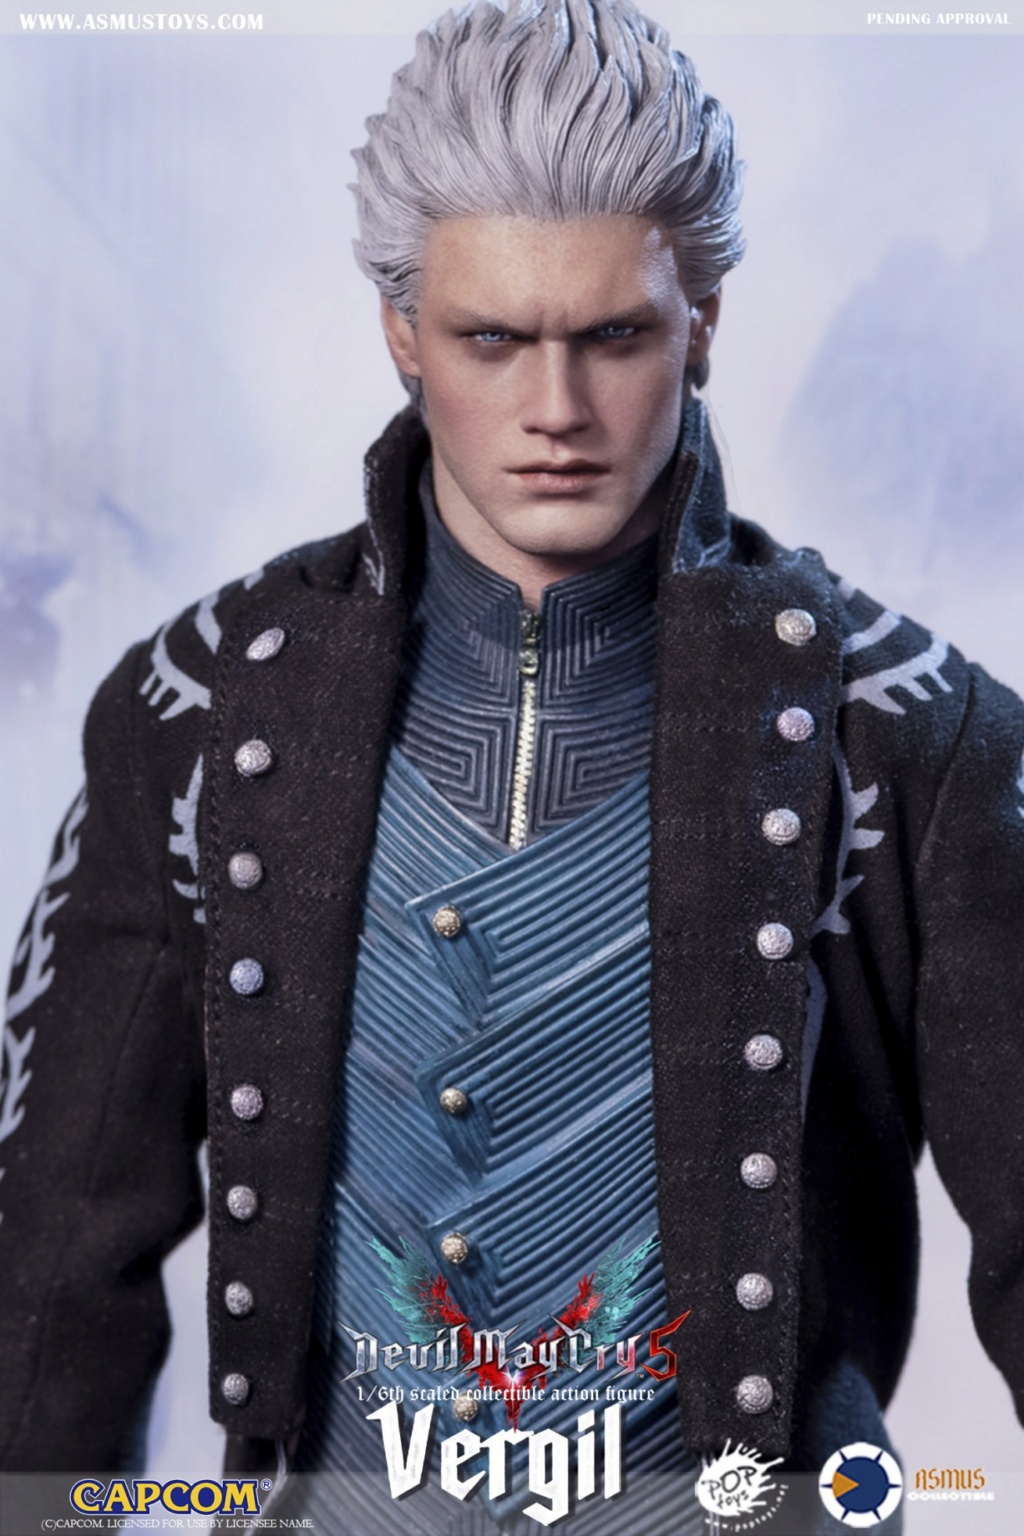 Virgil - NEW PRODUCT: Asmus Toys New Products: 1/6 "Devil Hunter/Devil May Cry 5" series-Virgil Standard & Deluxe Edition 180d2210